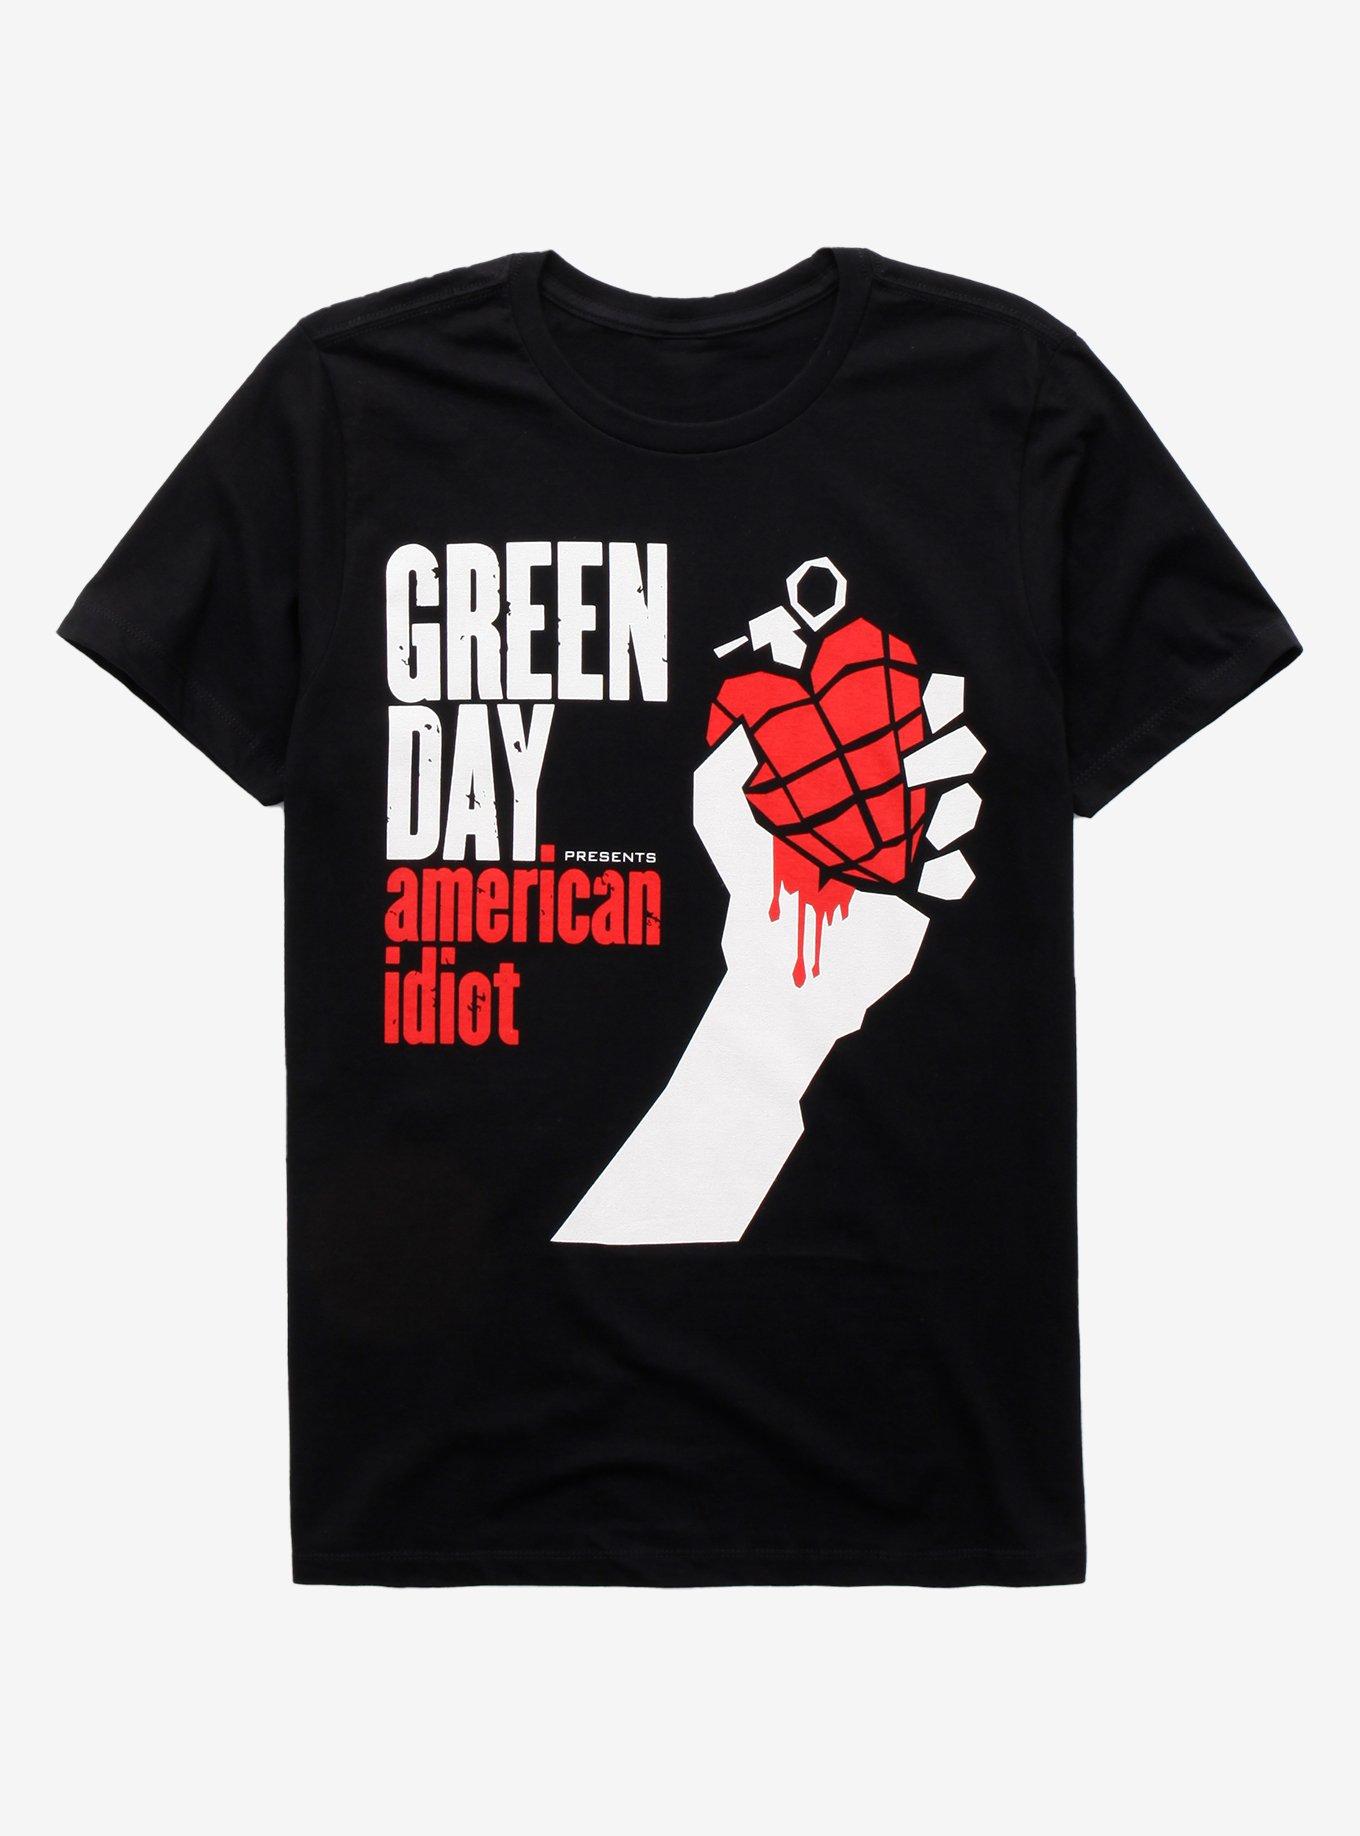 So I went to Hot Topic today : r/greenday